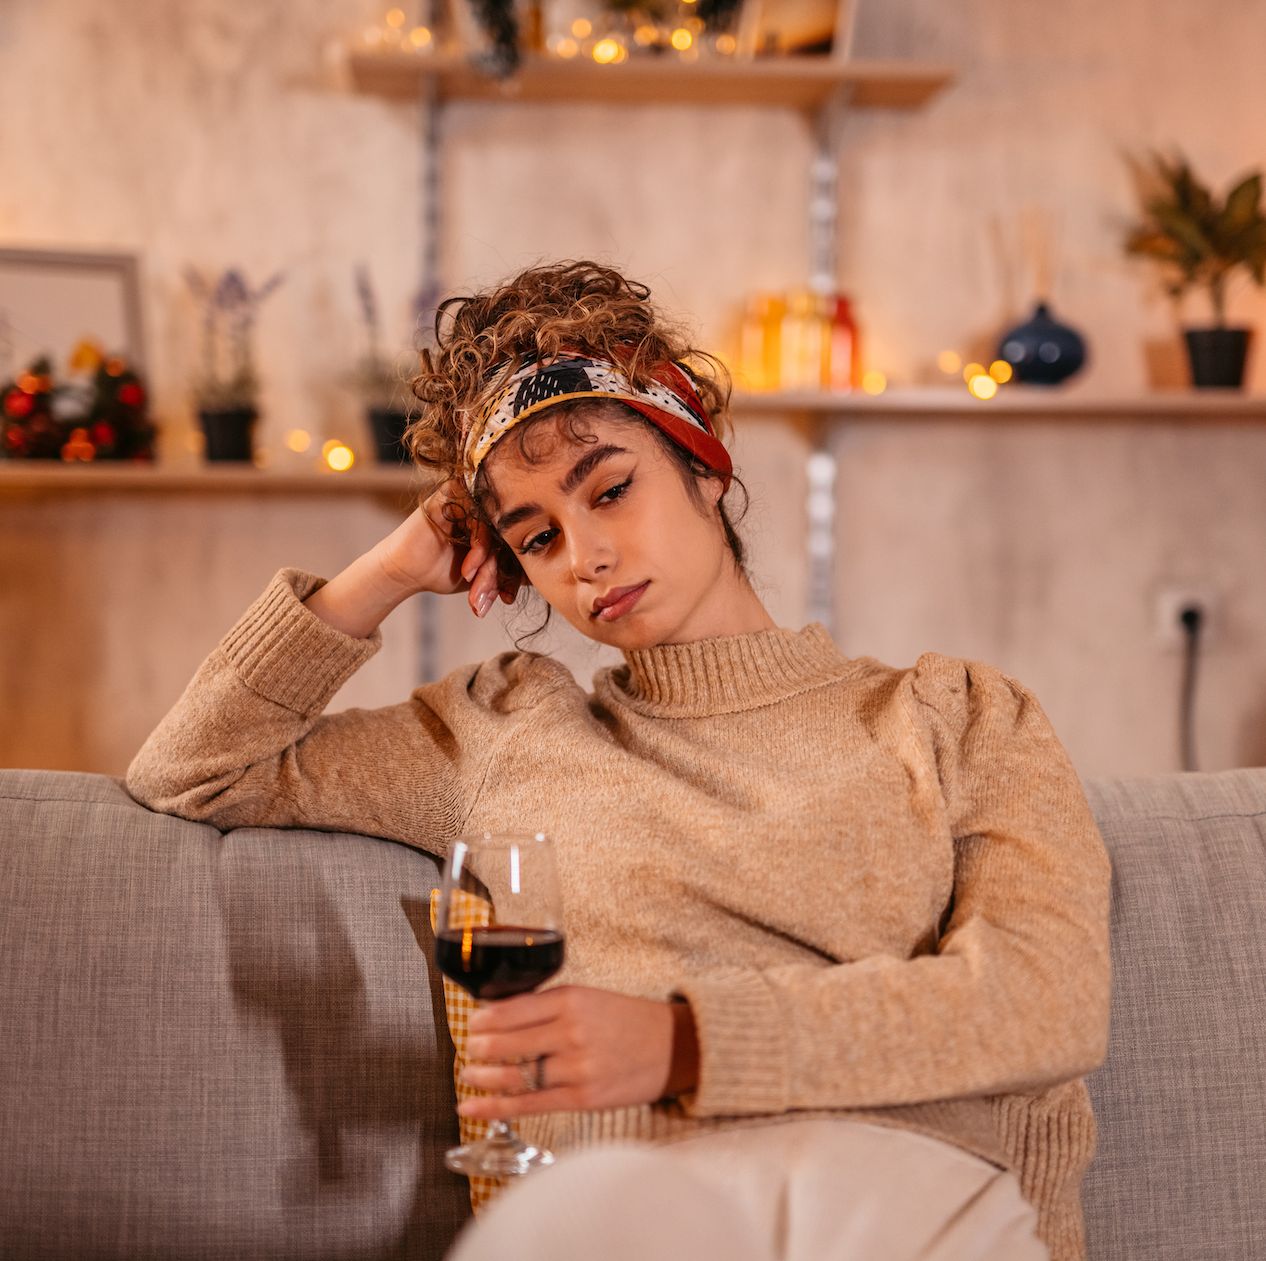 lonely and sad young woman drinking a glass of red wine alone on the sofa with christmas lights and a tree behind her